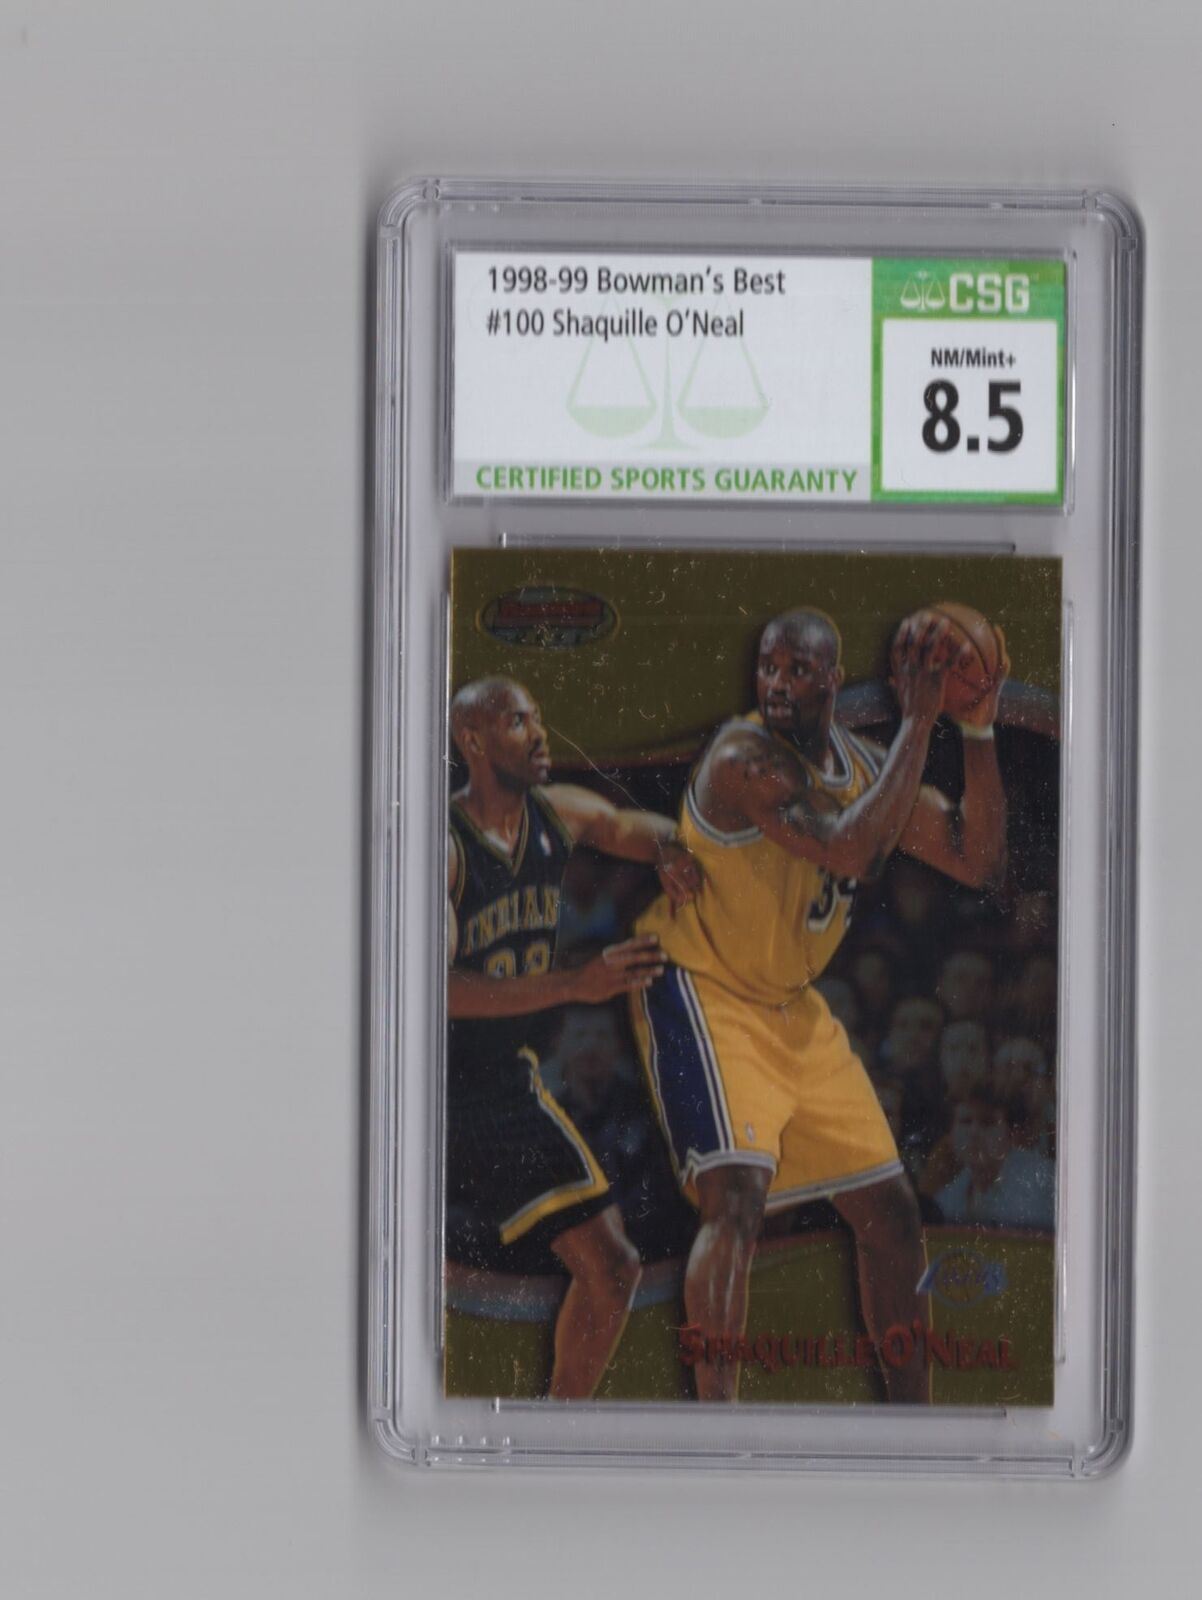 1998-99 Bowman's Best Shaquille O'Neal CSG 8.5 Los Angeles Lakers